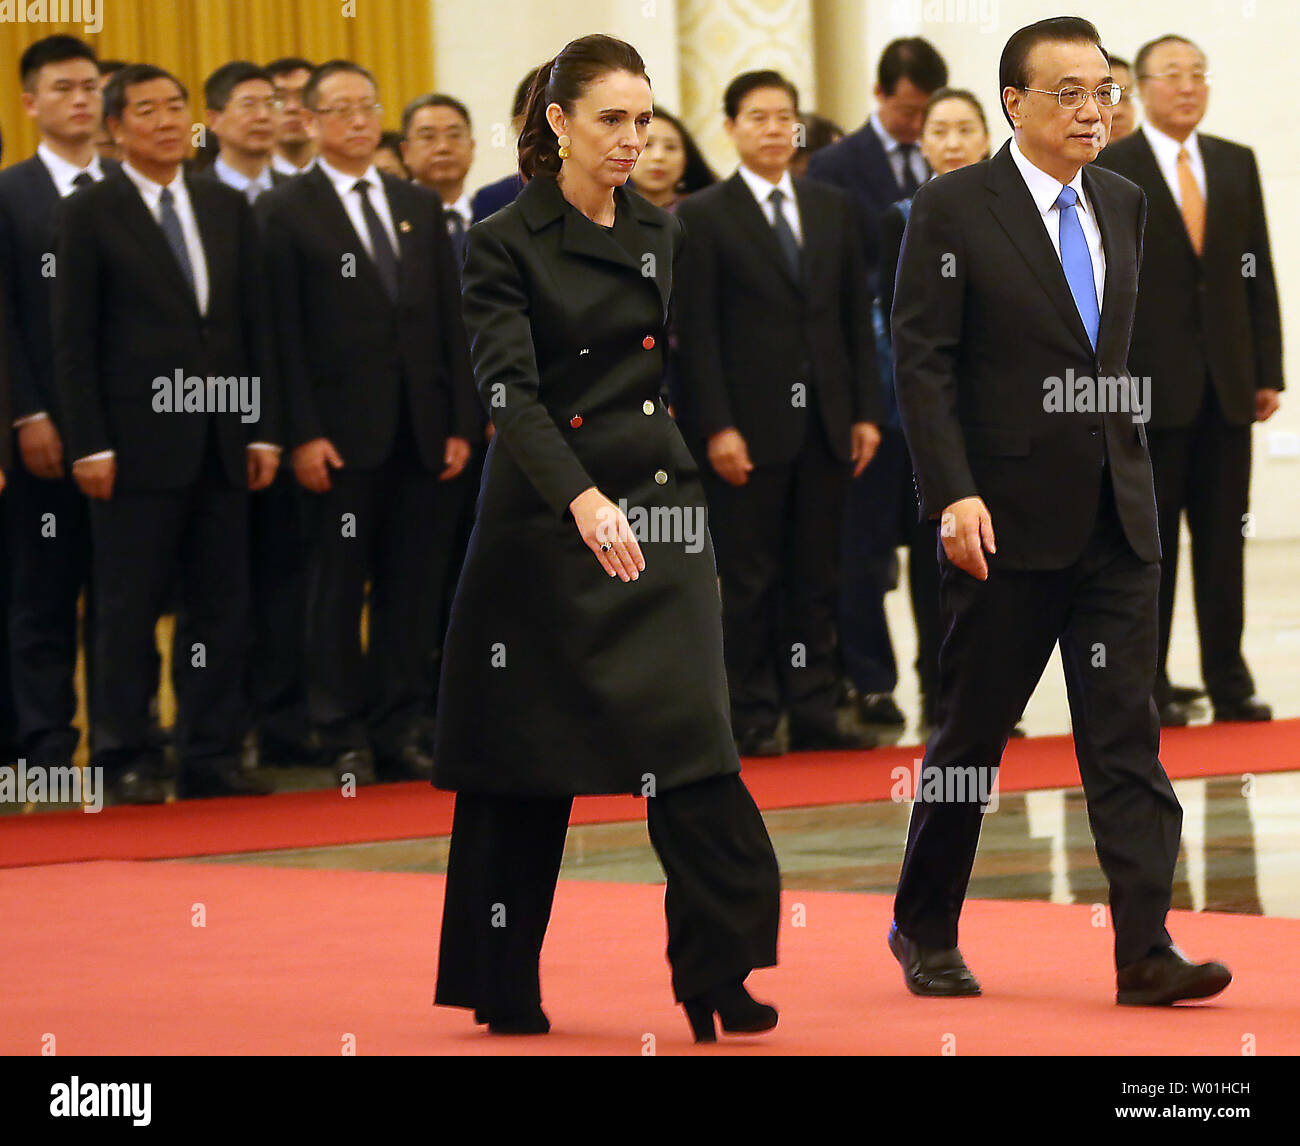 Chinese Premier Li Keqiang (R) and New Zealand (NZ) Prime Minister Jacinda Ardern attend a welcoming ceremony at the Great Hall of the People in Beijing on April 1, 2019.  China and NZ signed agreements on eliminating double taxation and tax avoidance as the two countries look to reset economic relations.   Photo by Stephen Shaver/UPI Stock Photo